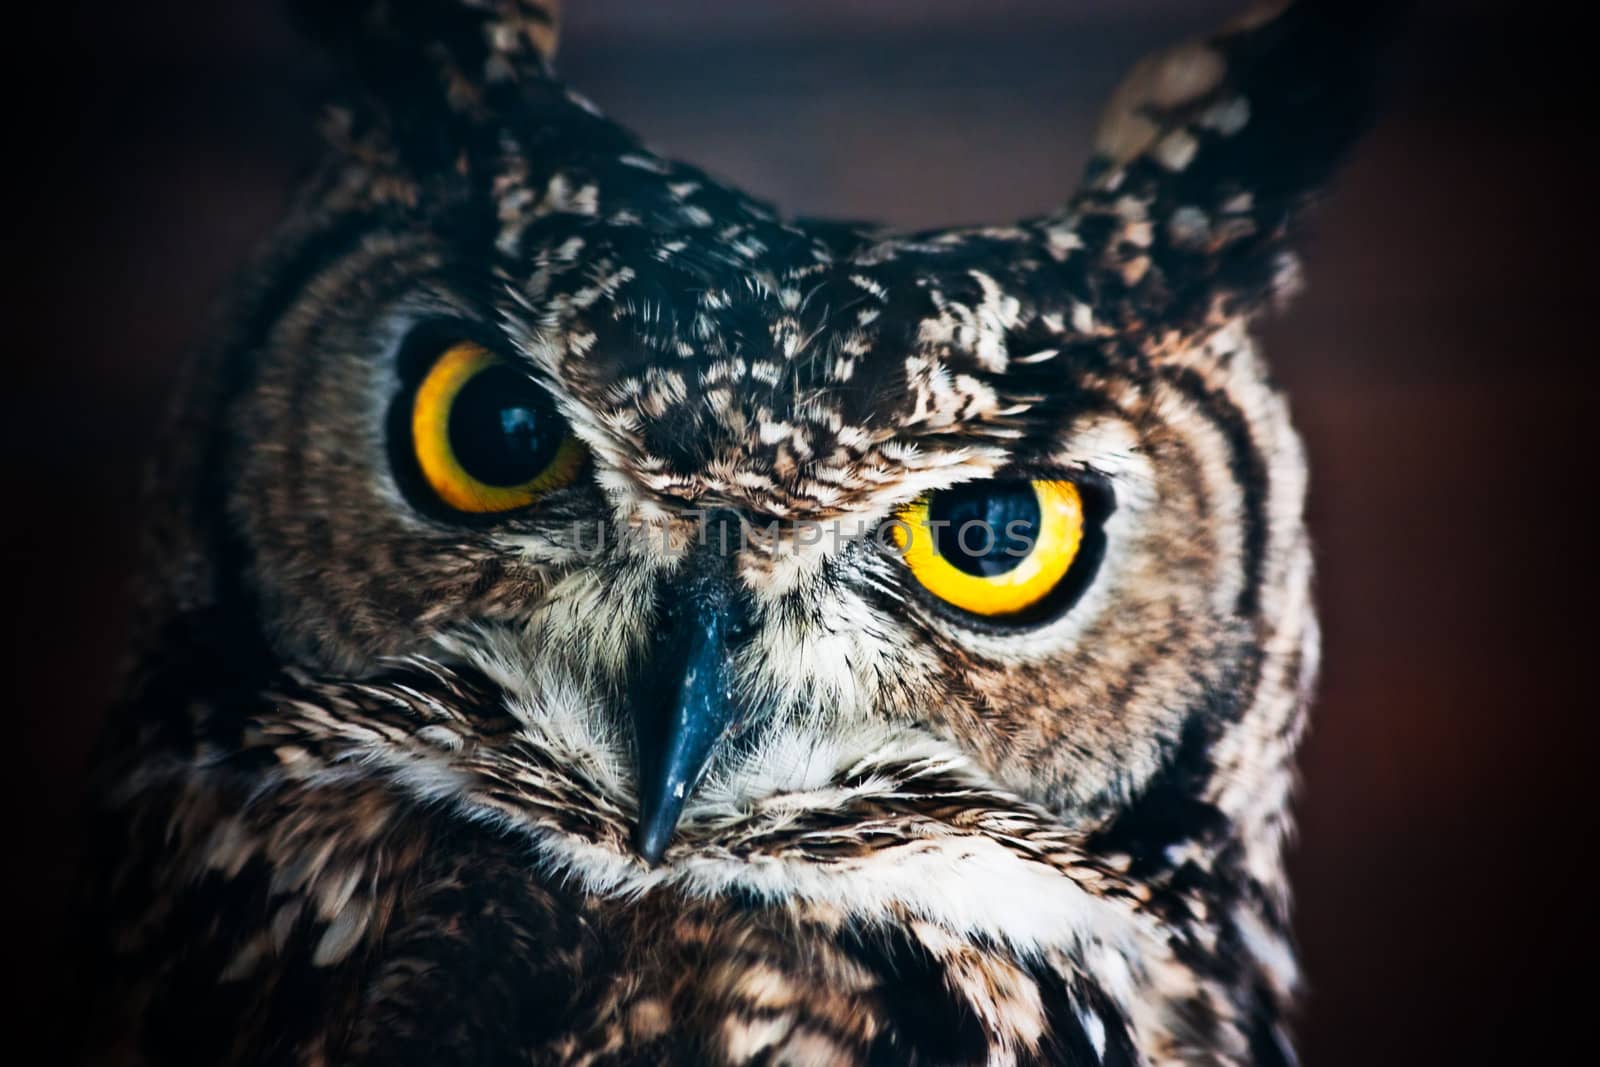 Small European owl, nocturnal bird of prey with hawk-like beak and claws and large head with front-facing eyes